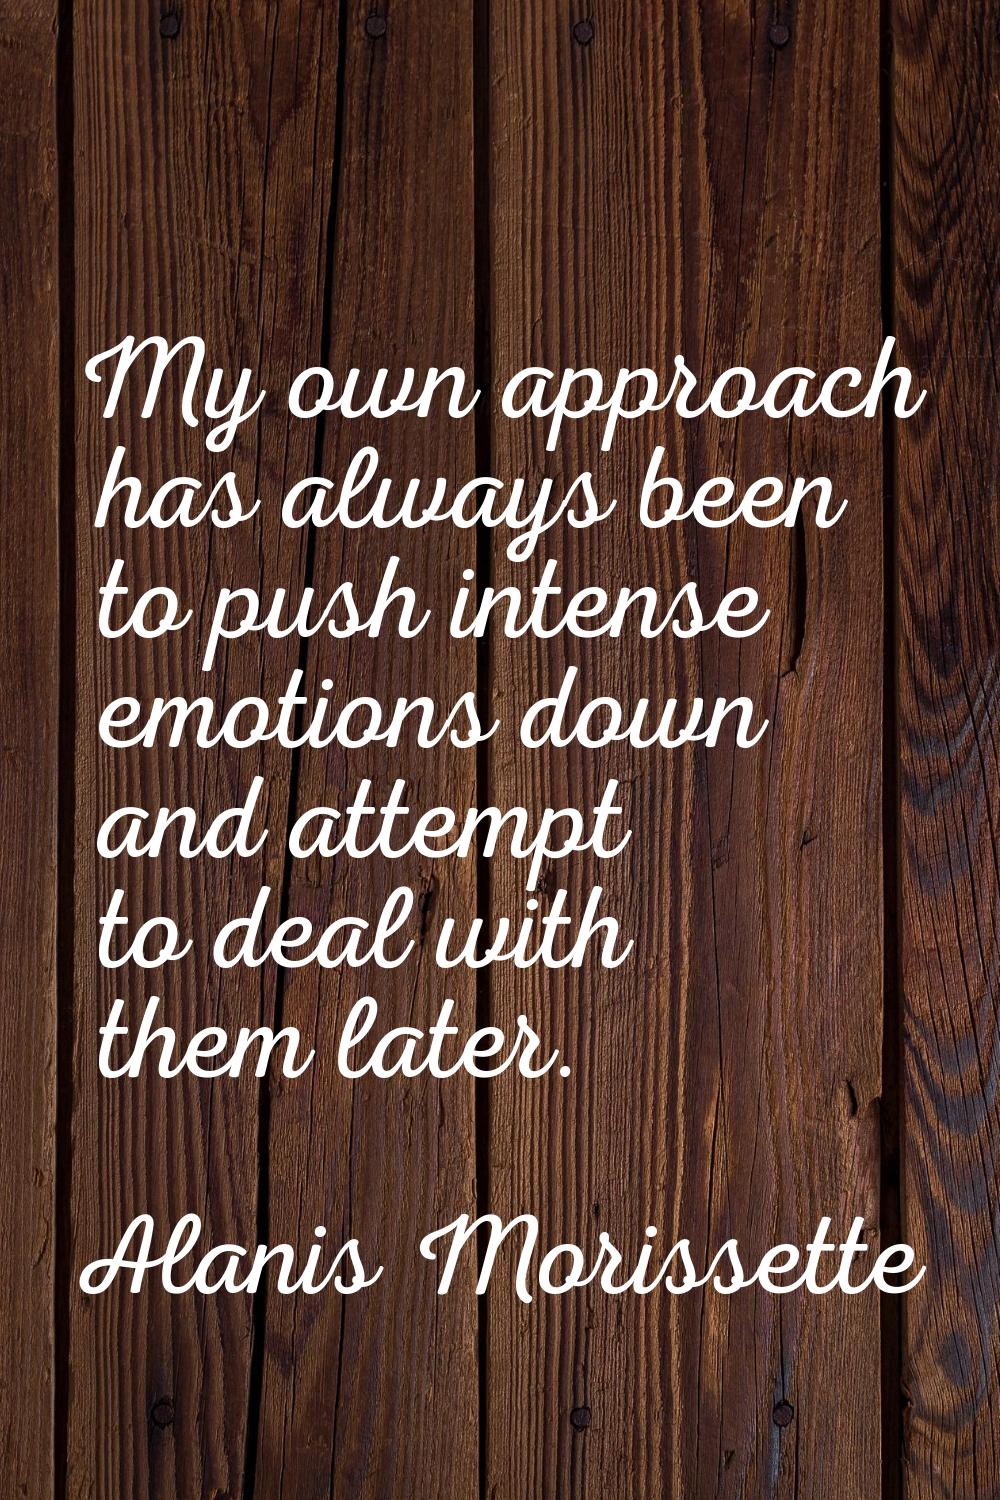 My own approach has always been to push intense emotions down and attempt to deal with them later.